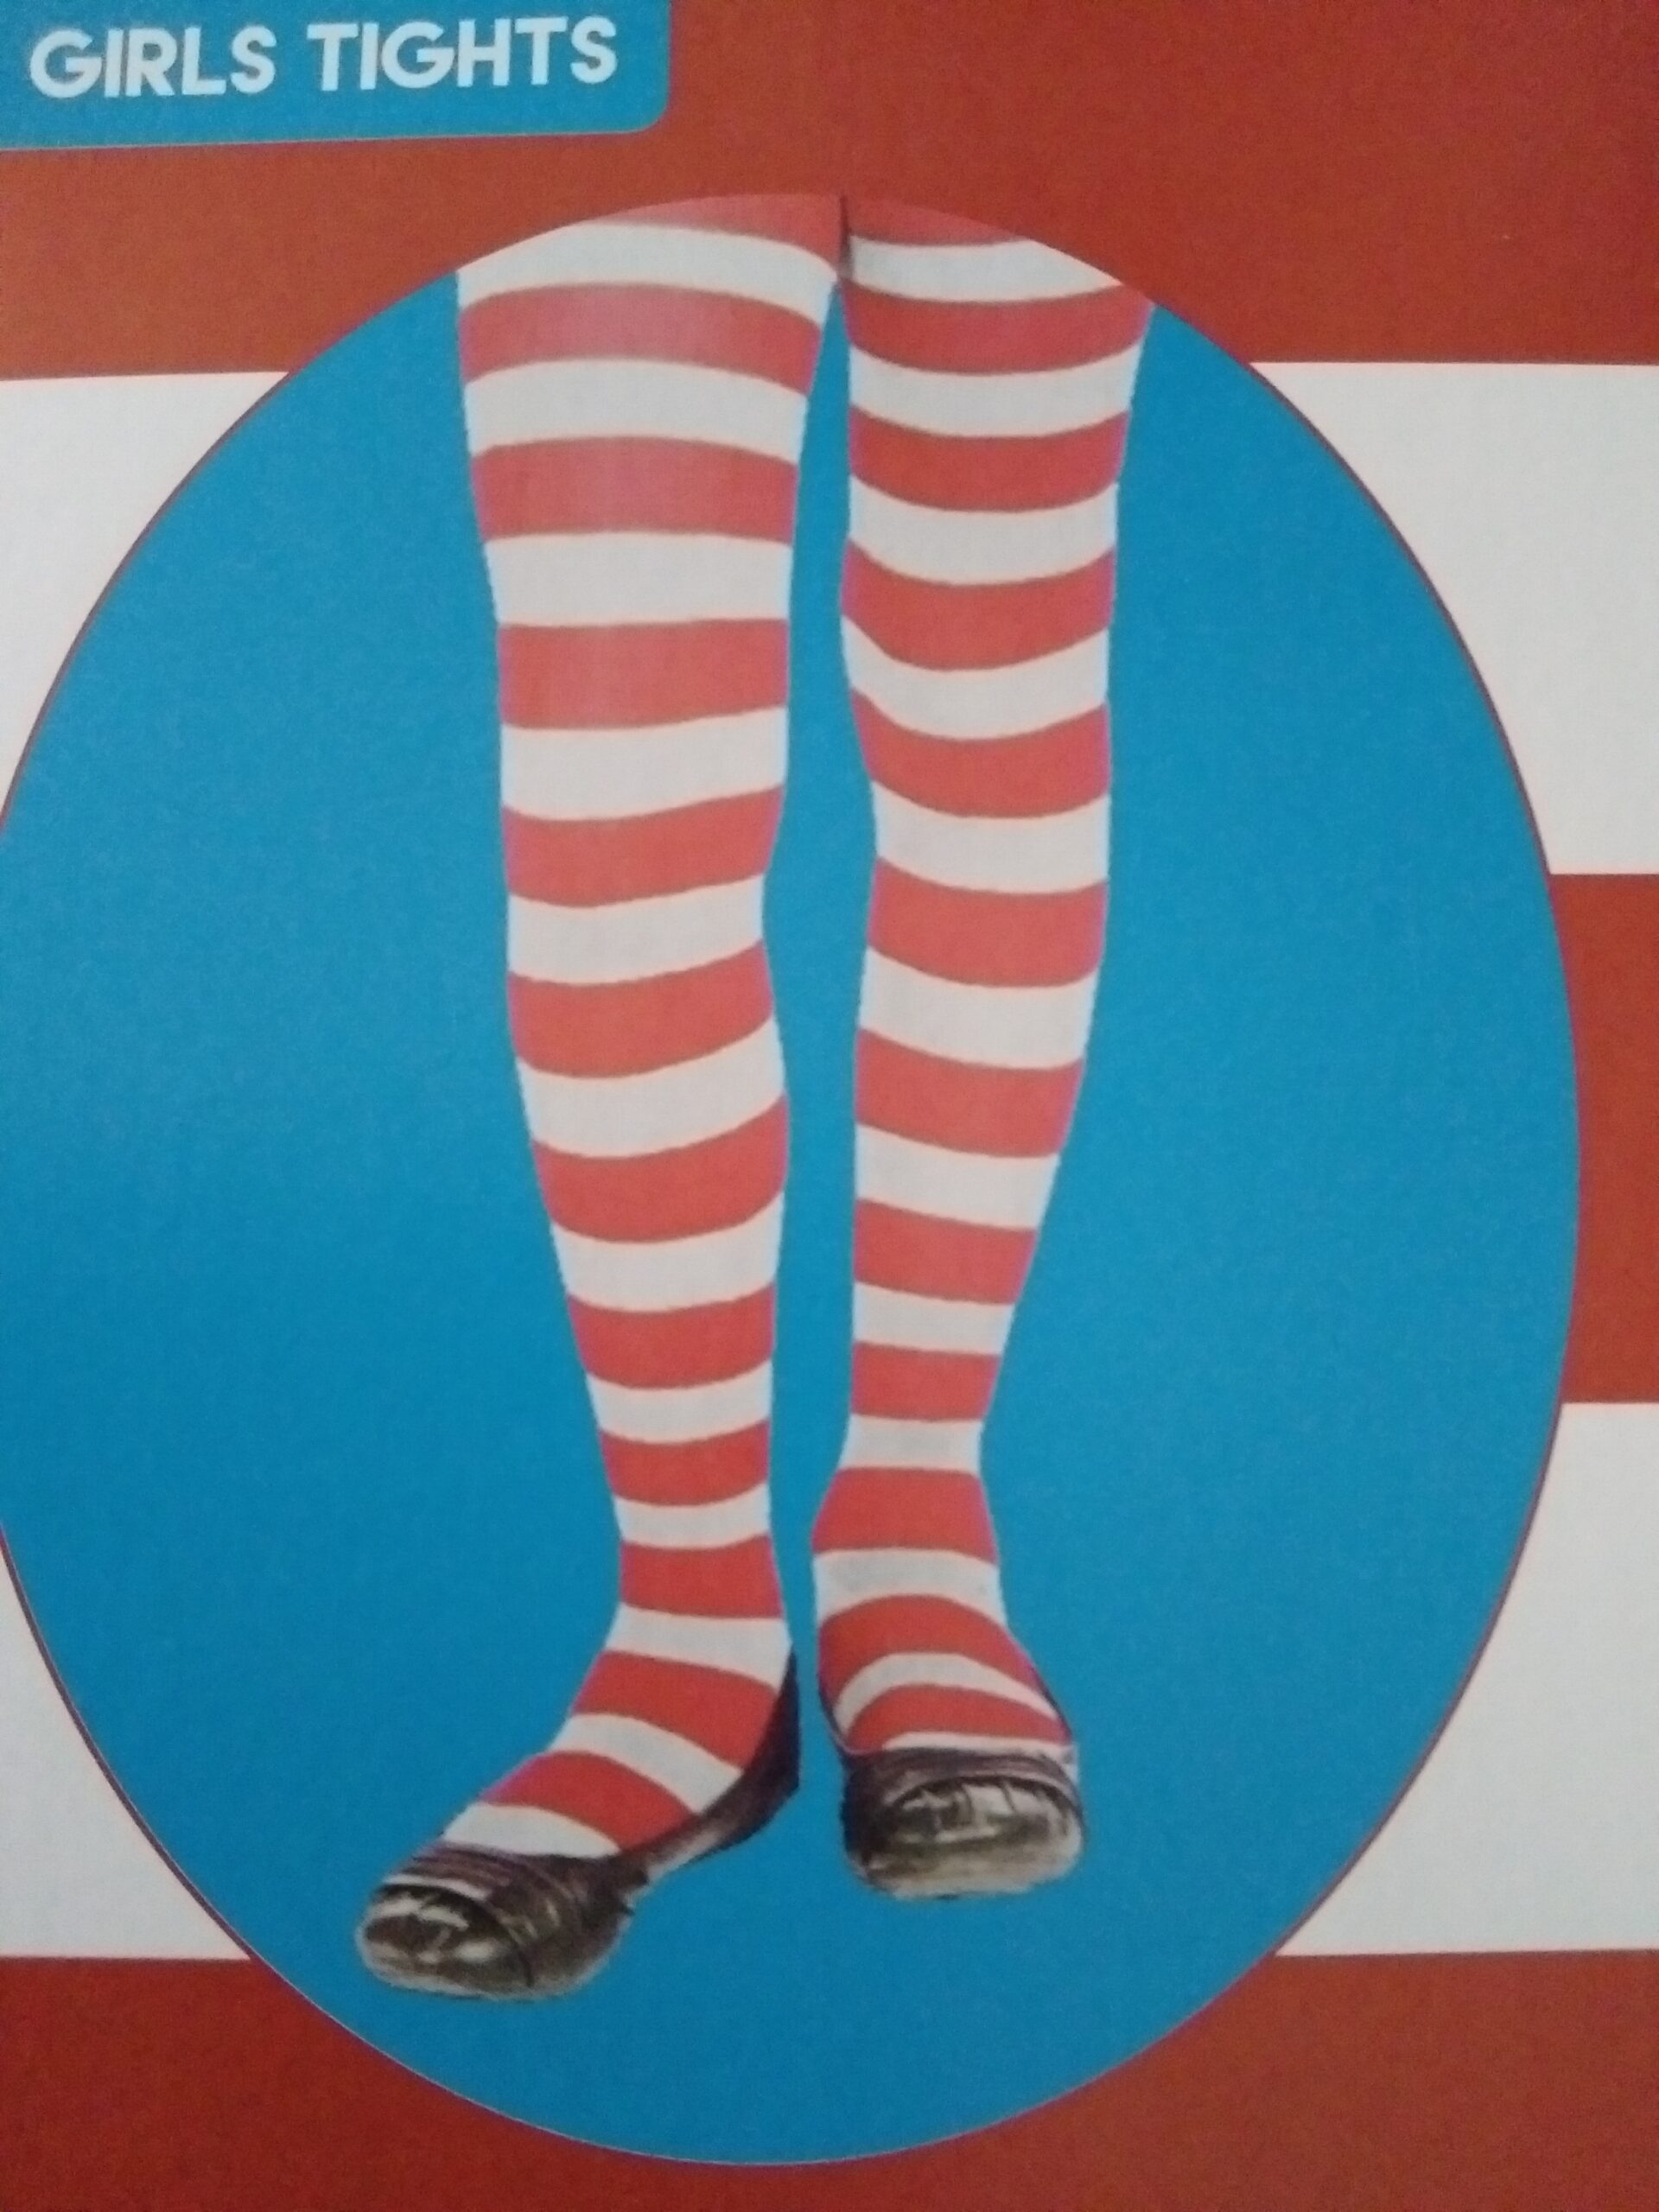 Girls Red And White Striped Tights 